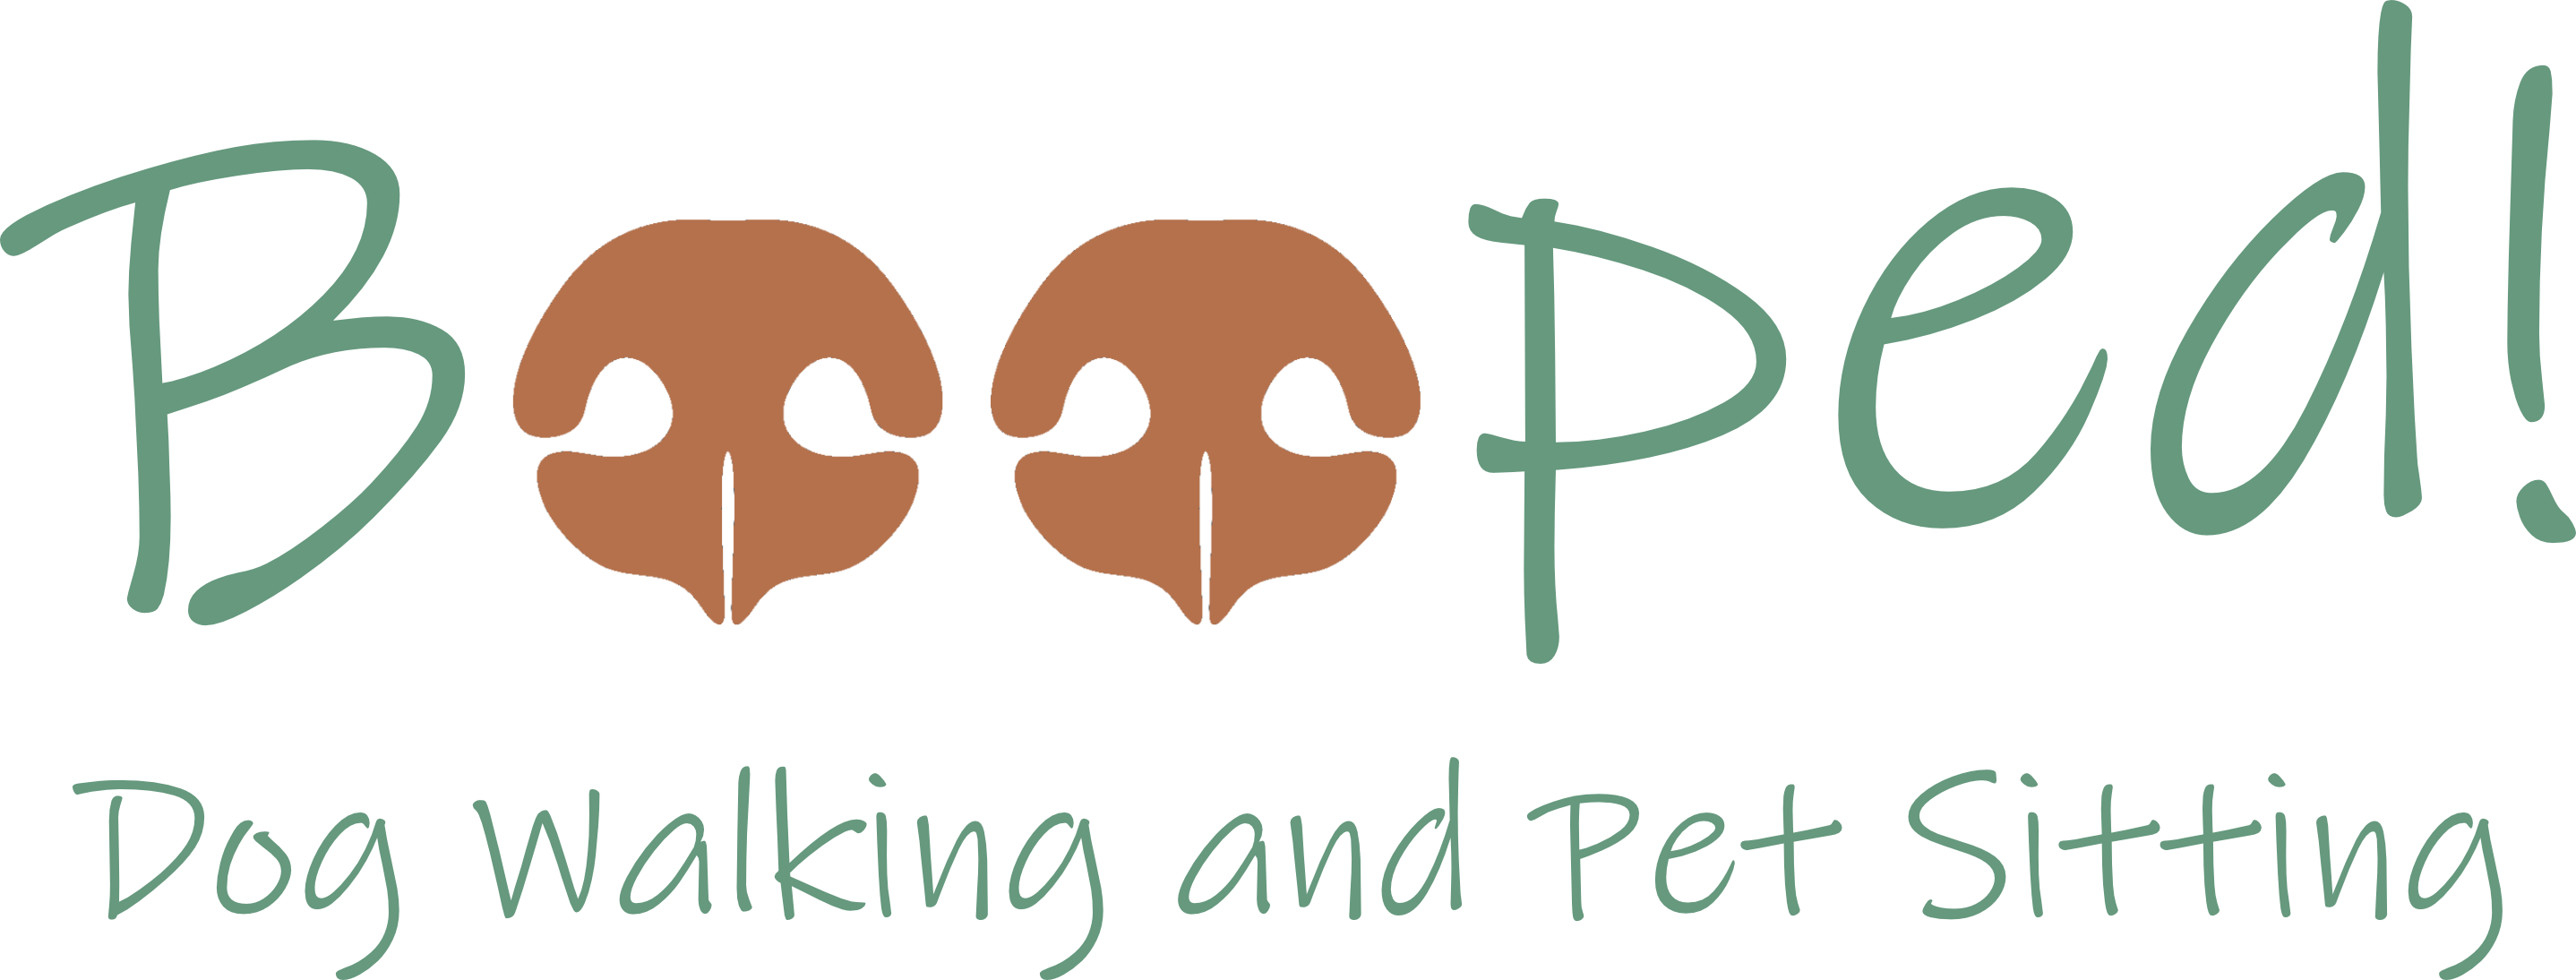 Booped! Pet Services